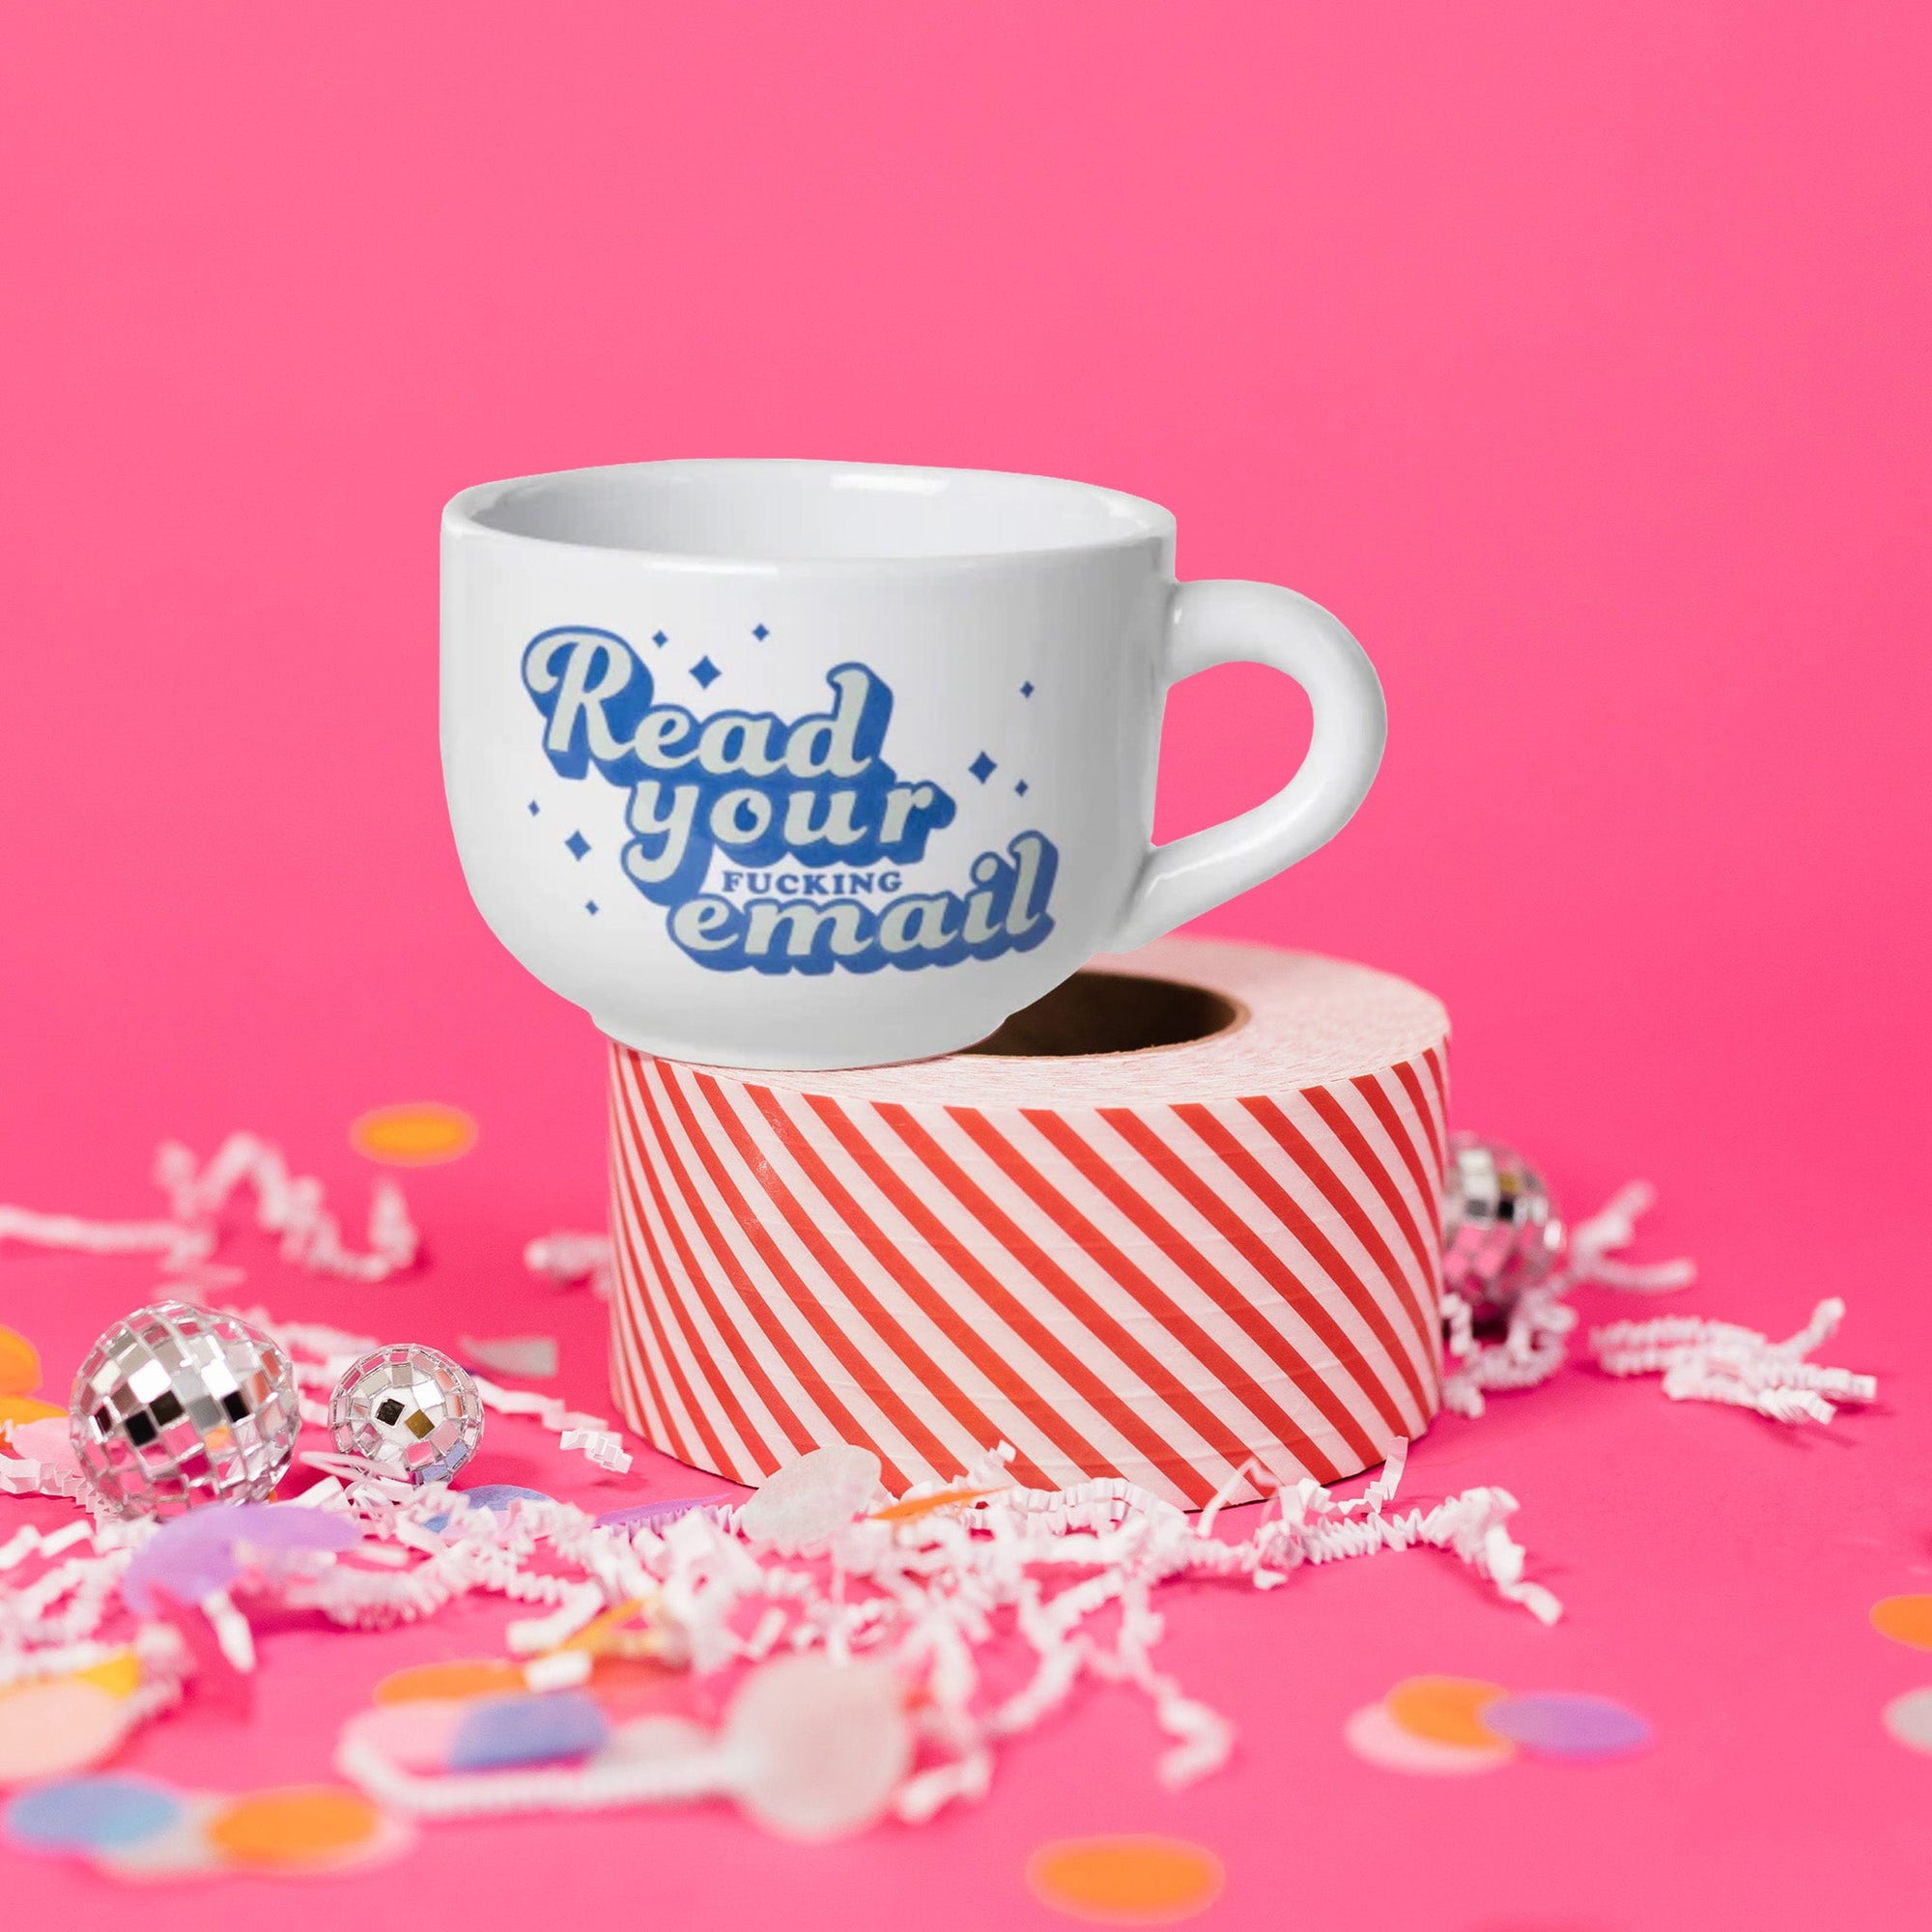 On a hot pink background sits a mug on top of a red and white striped packing tape with white crinkle and big, colorful confetti scattered around. There are mini disco balls. This white mug says "Read your fucking email" in a really cool retro lettering. It is in grey and blue and has blue stars scattered around the lettering.